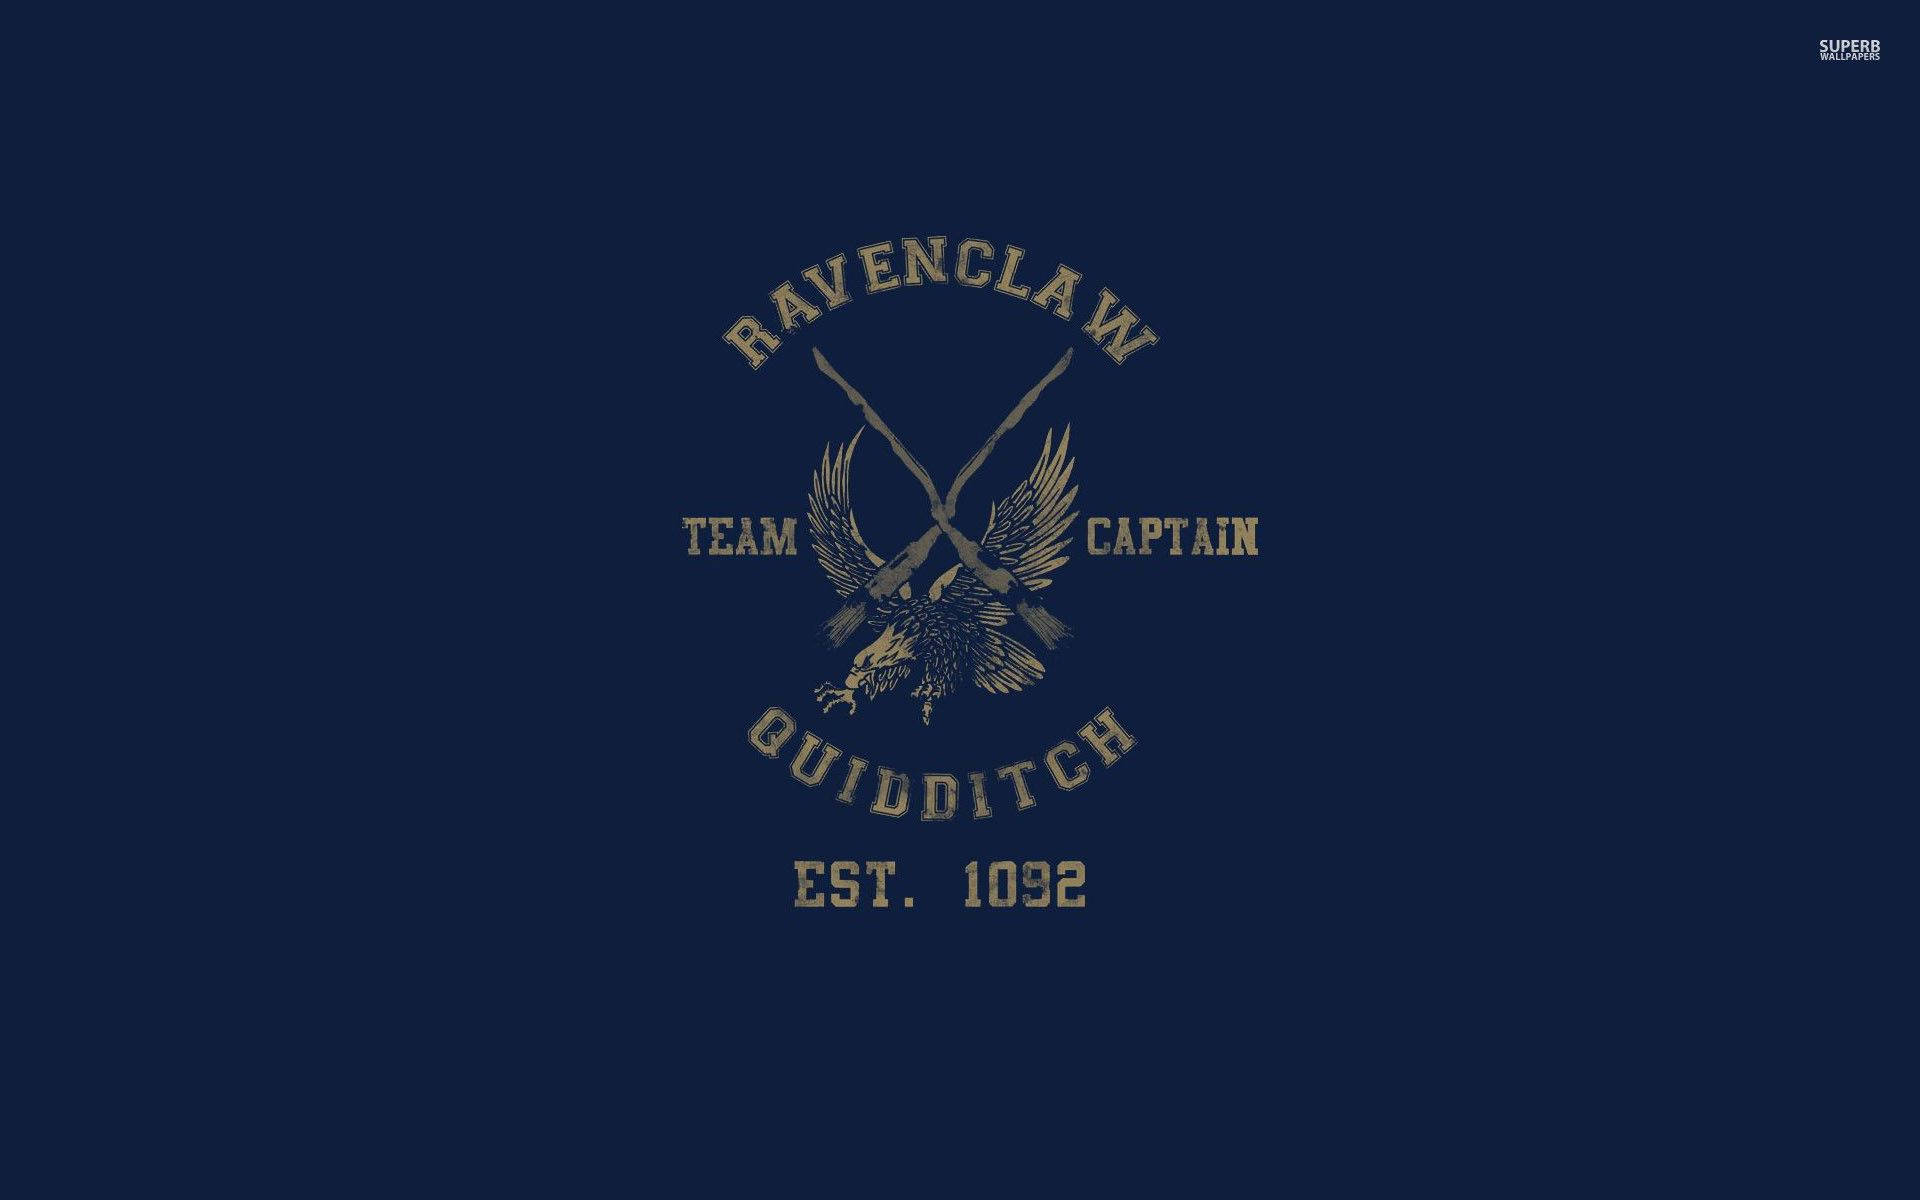 Ravenclaw 1920X1200 Wallpaper and Background Image